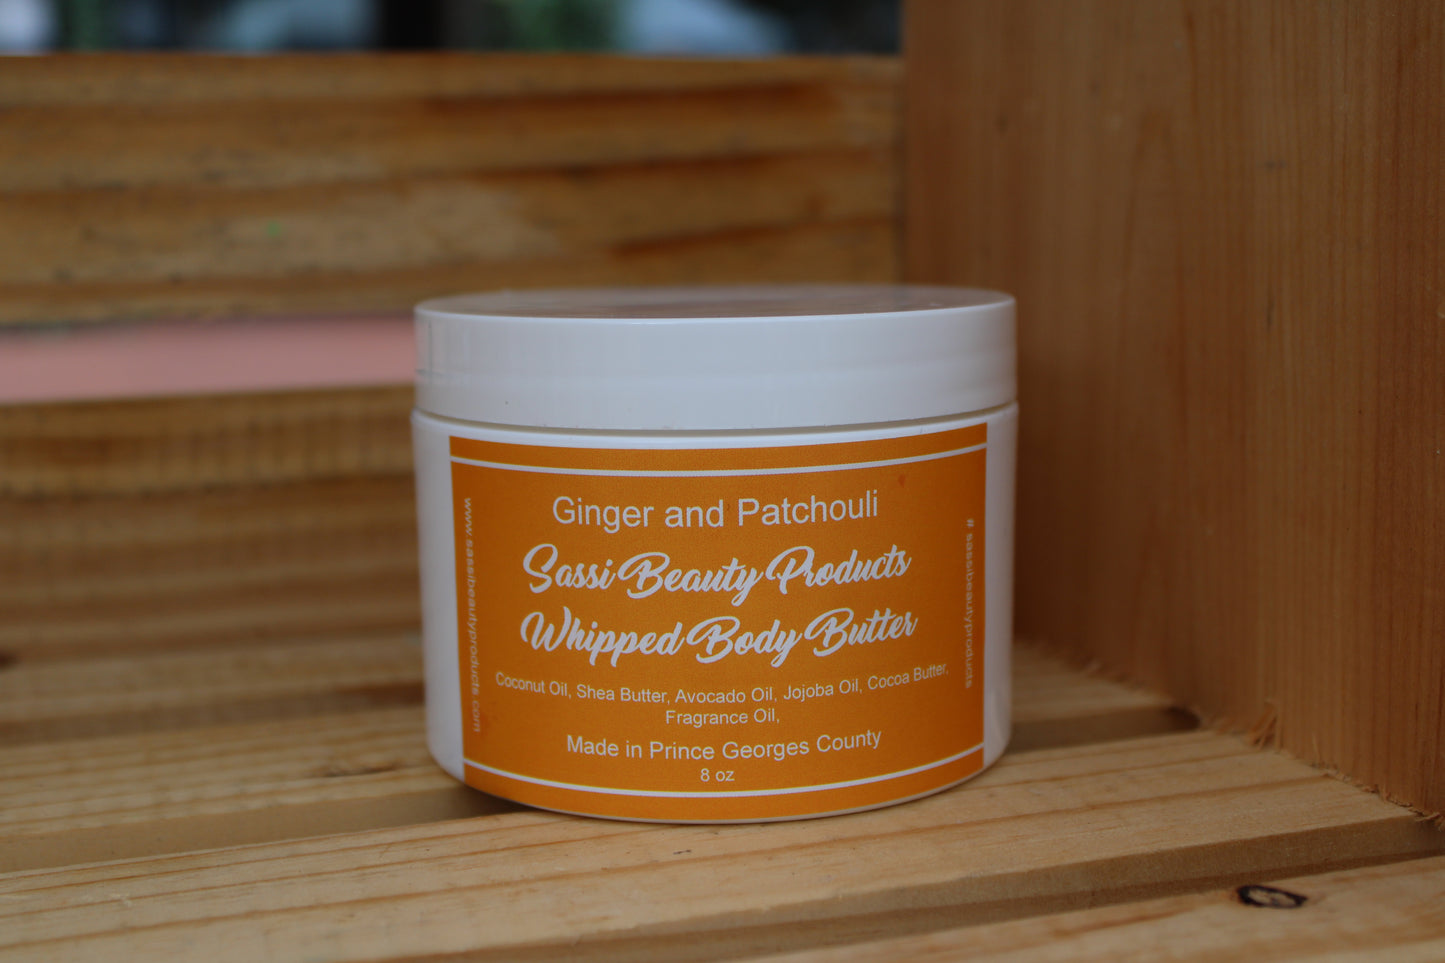 Ginger Patchouli Body Butter